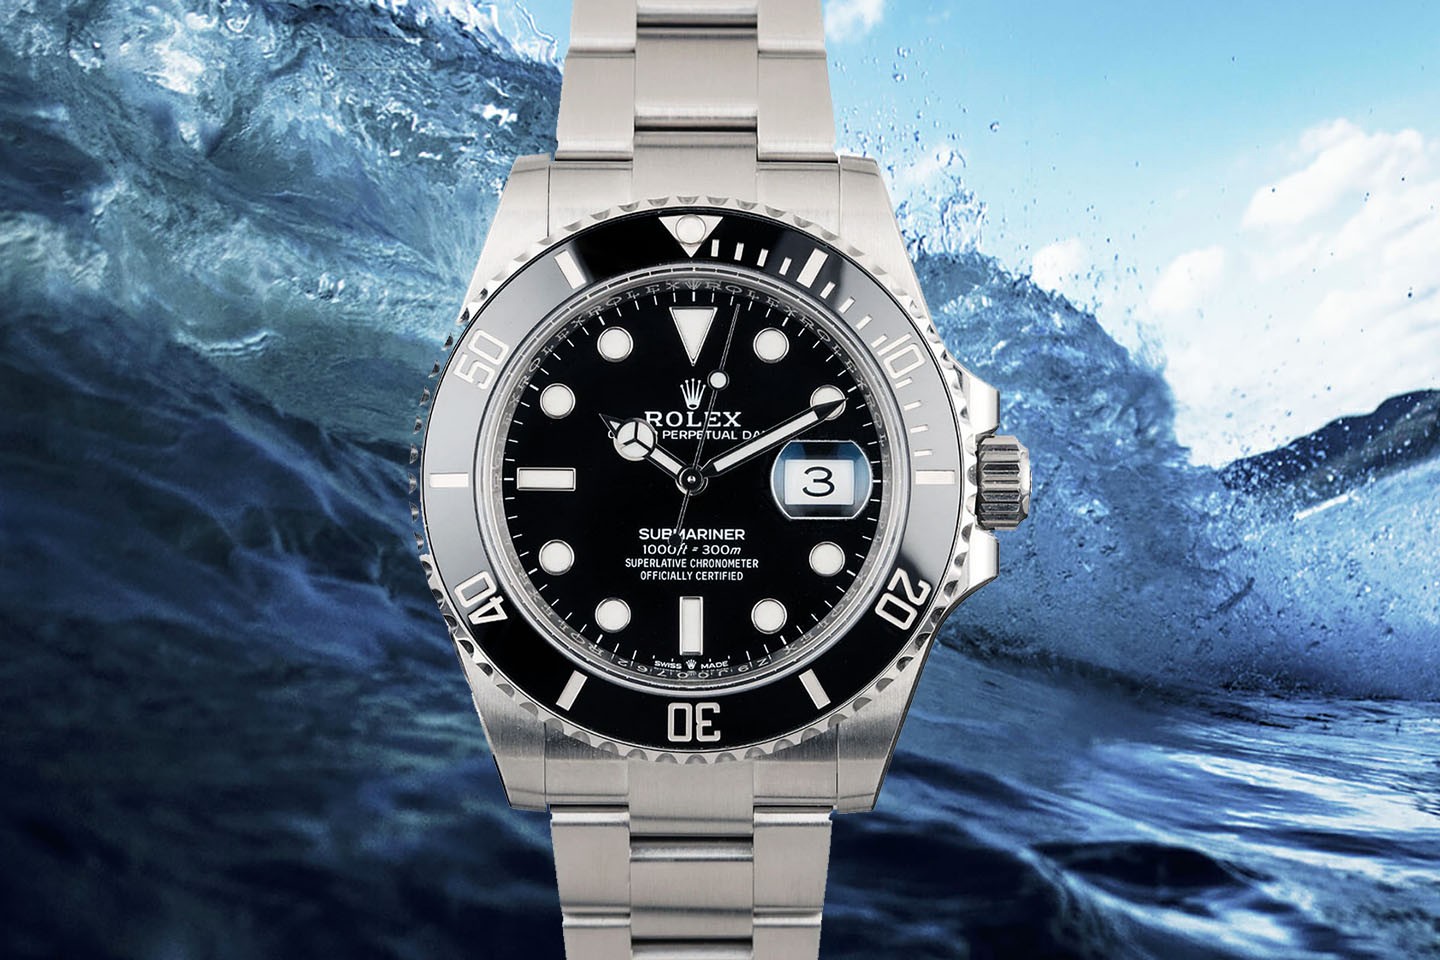 Why Replica Rolex Watches are Gaining Popularity